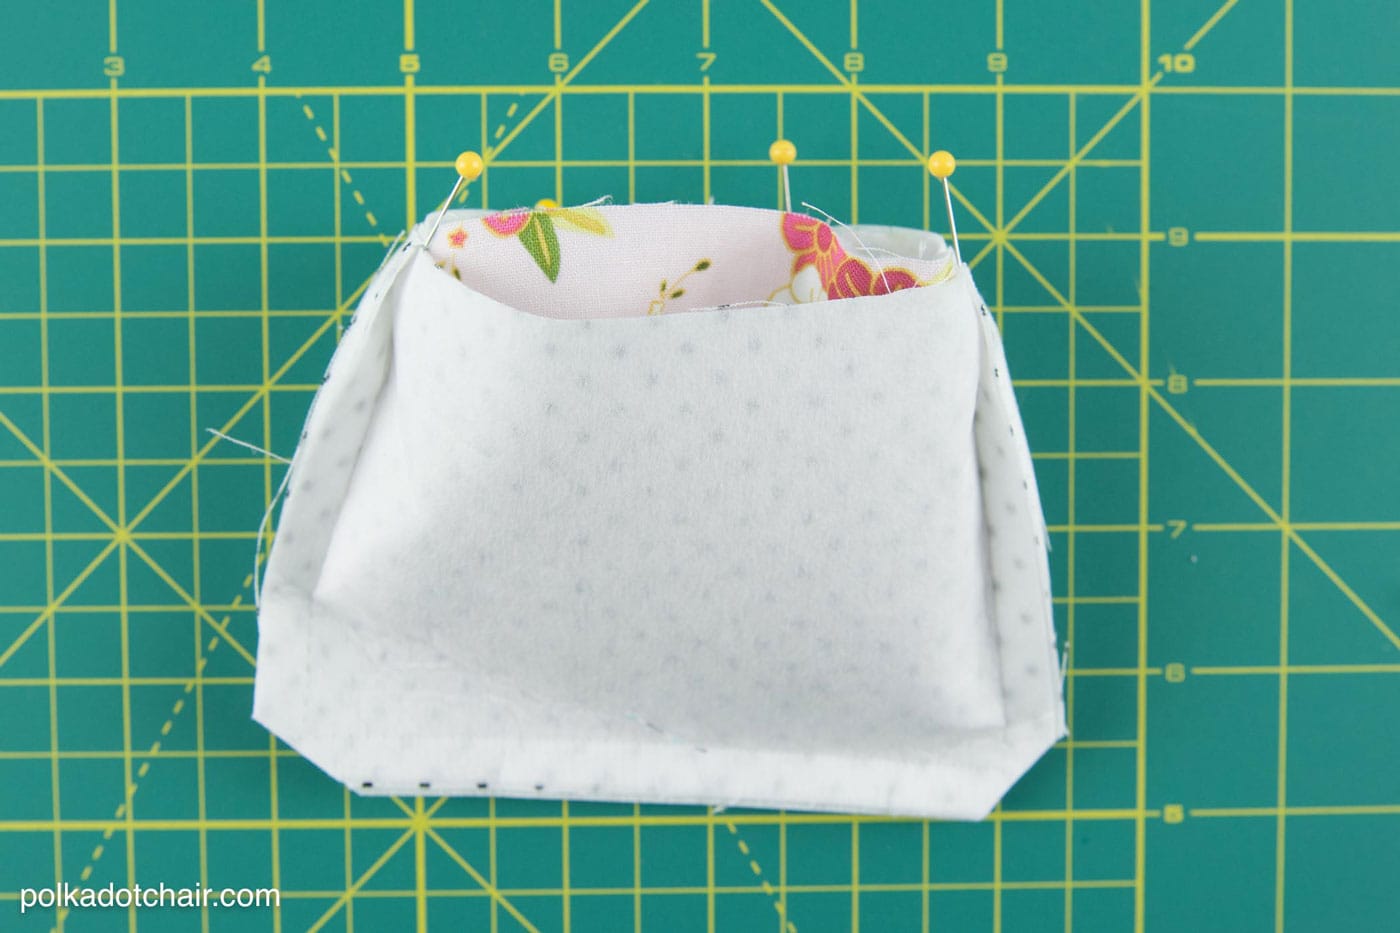 Free Sewing Pattern for a fabric and leather earbuds carrying case, would also be a great business card holder, by polkadotchair.com